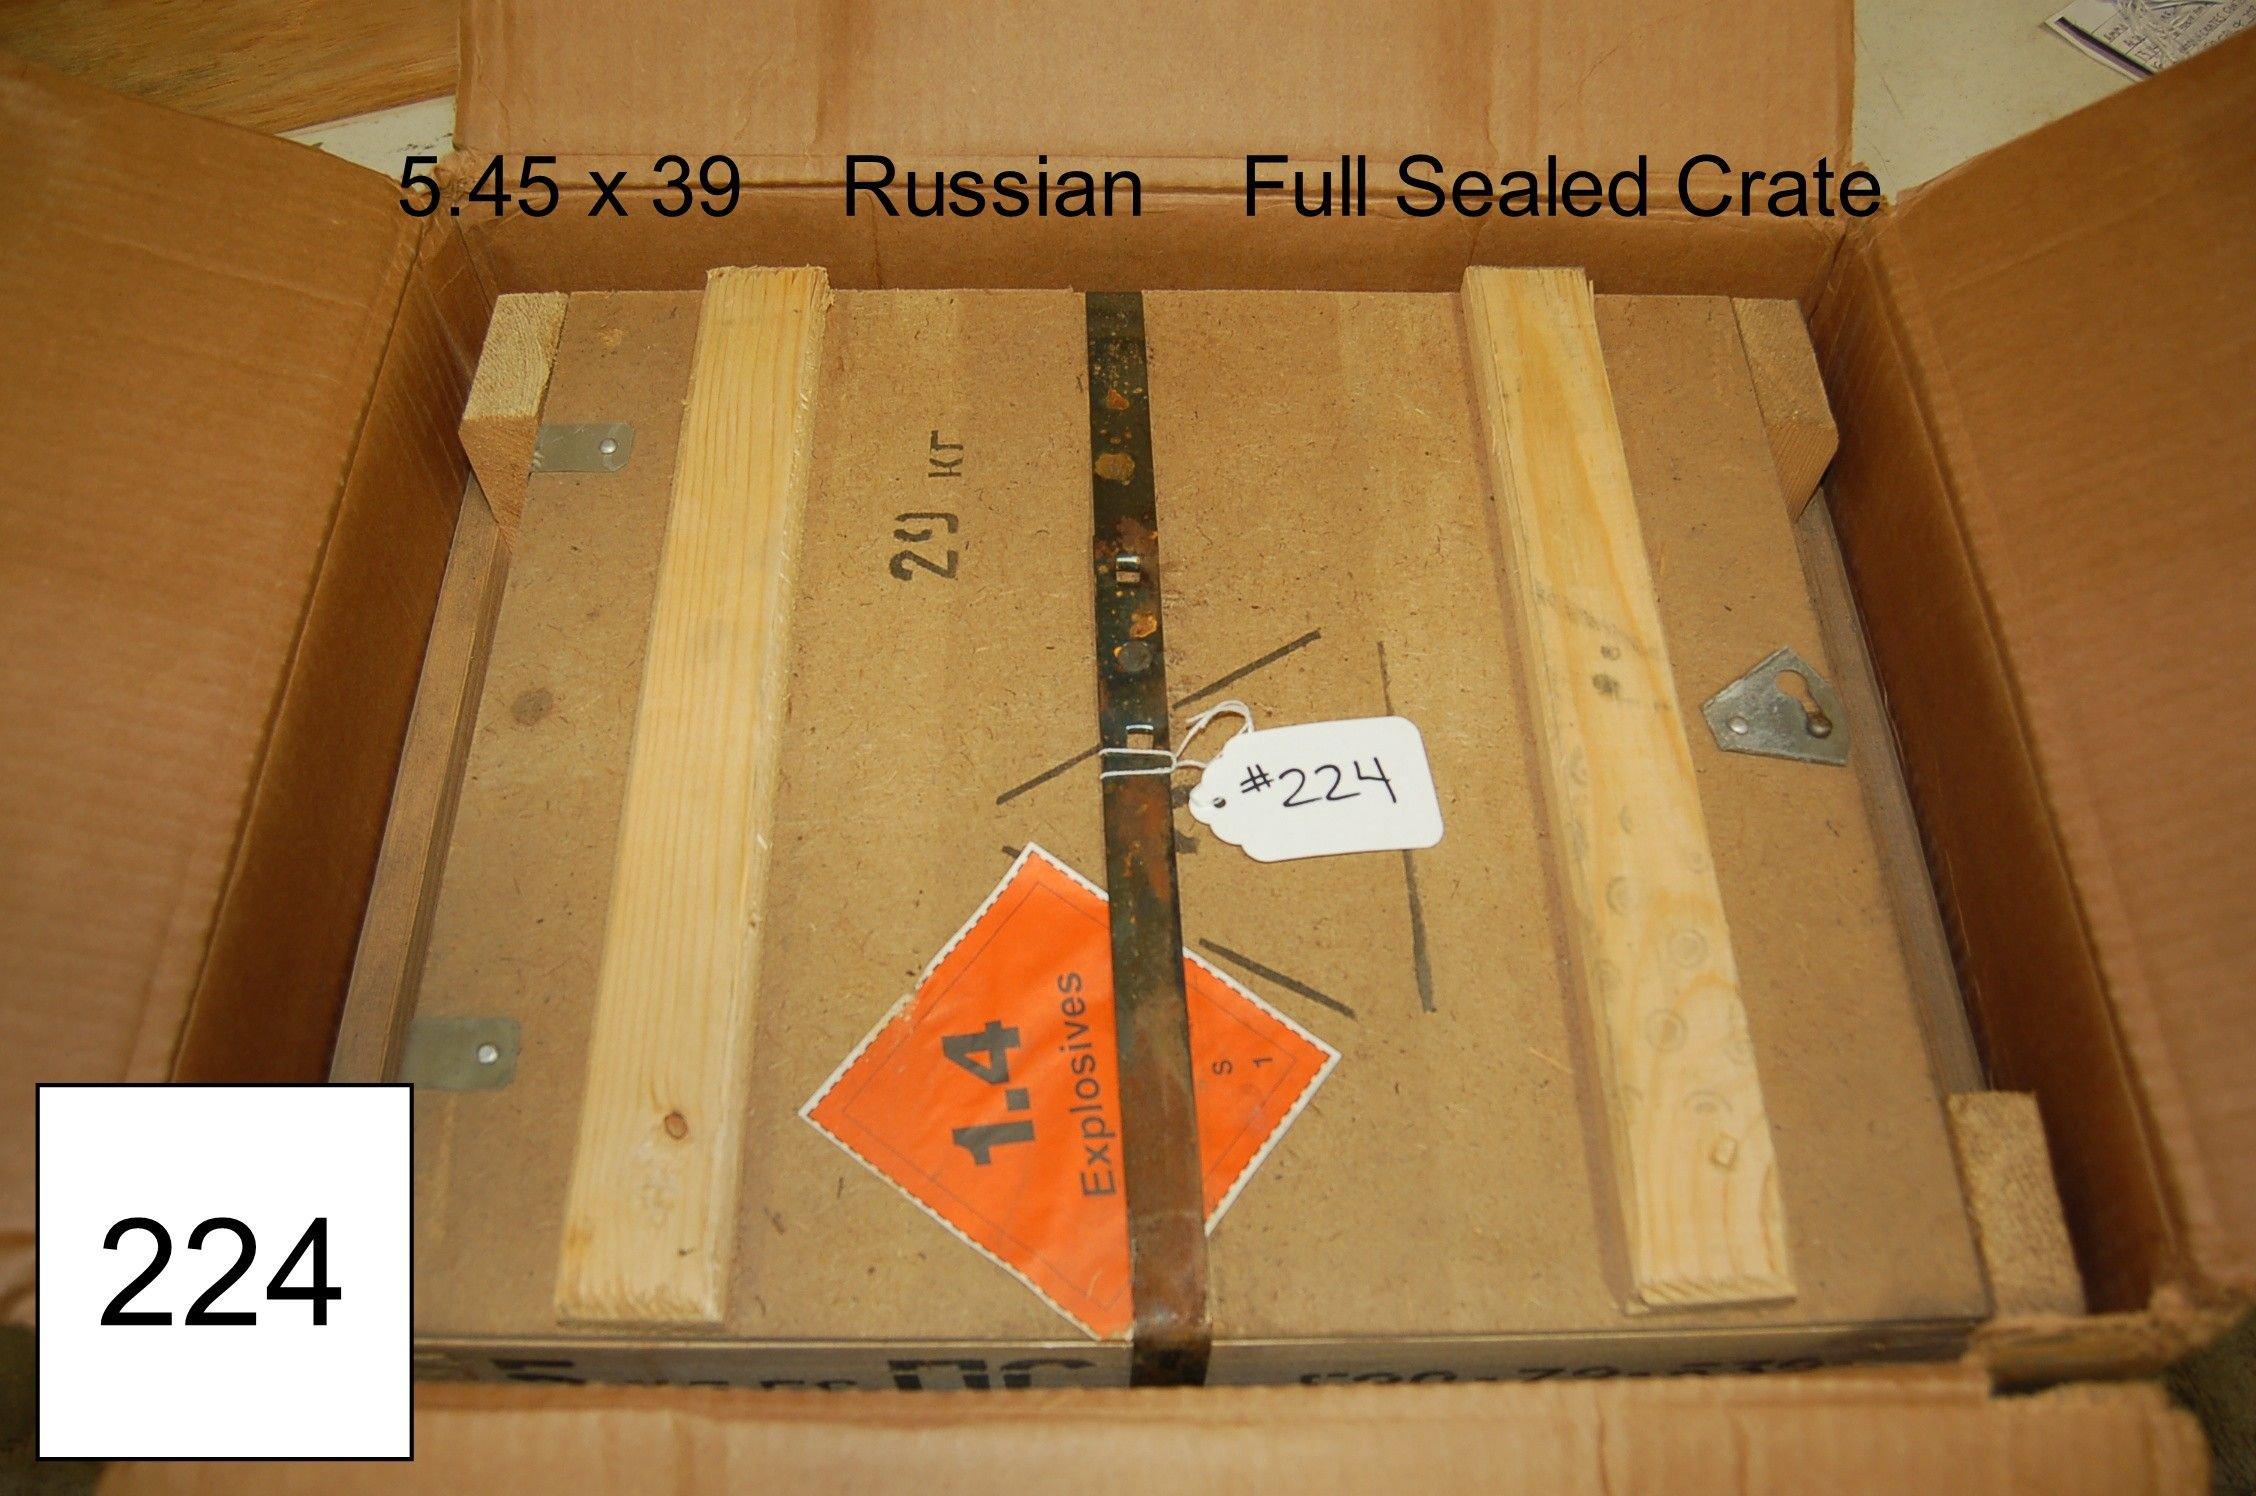 5.45 x 39    Russian    Full Sealed Crate